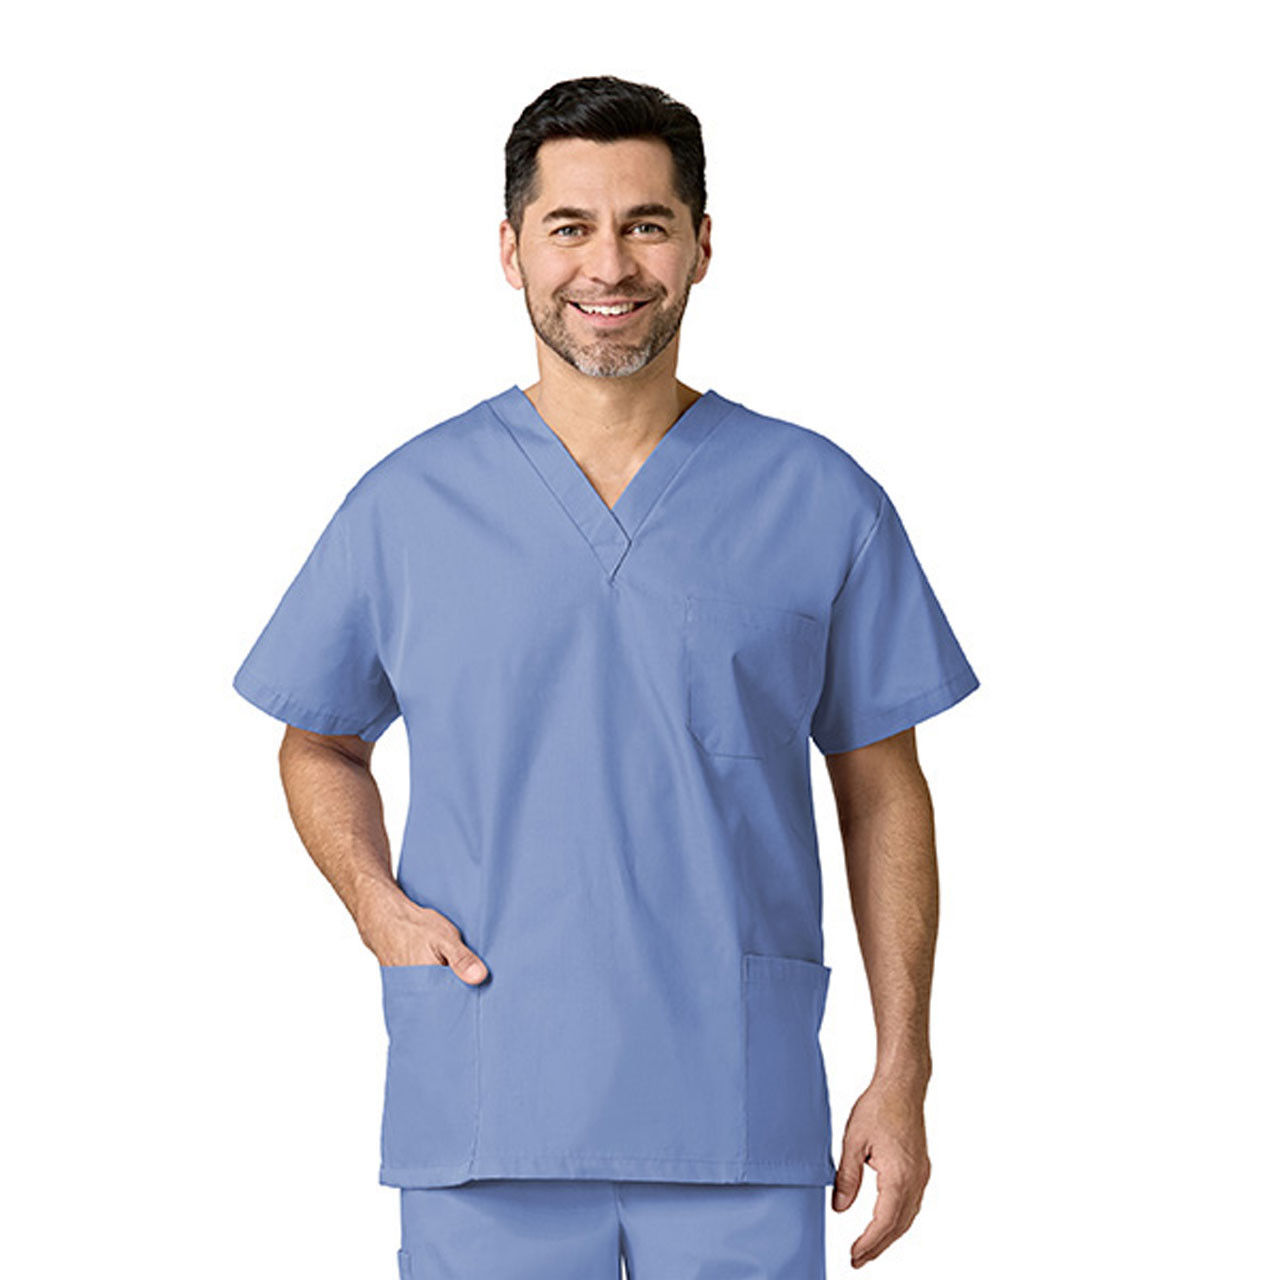 What are the common uses for these unisex scrub tops?